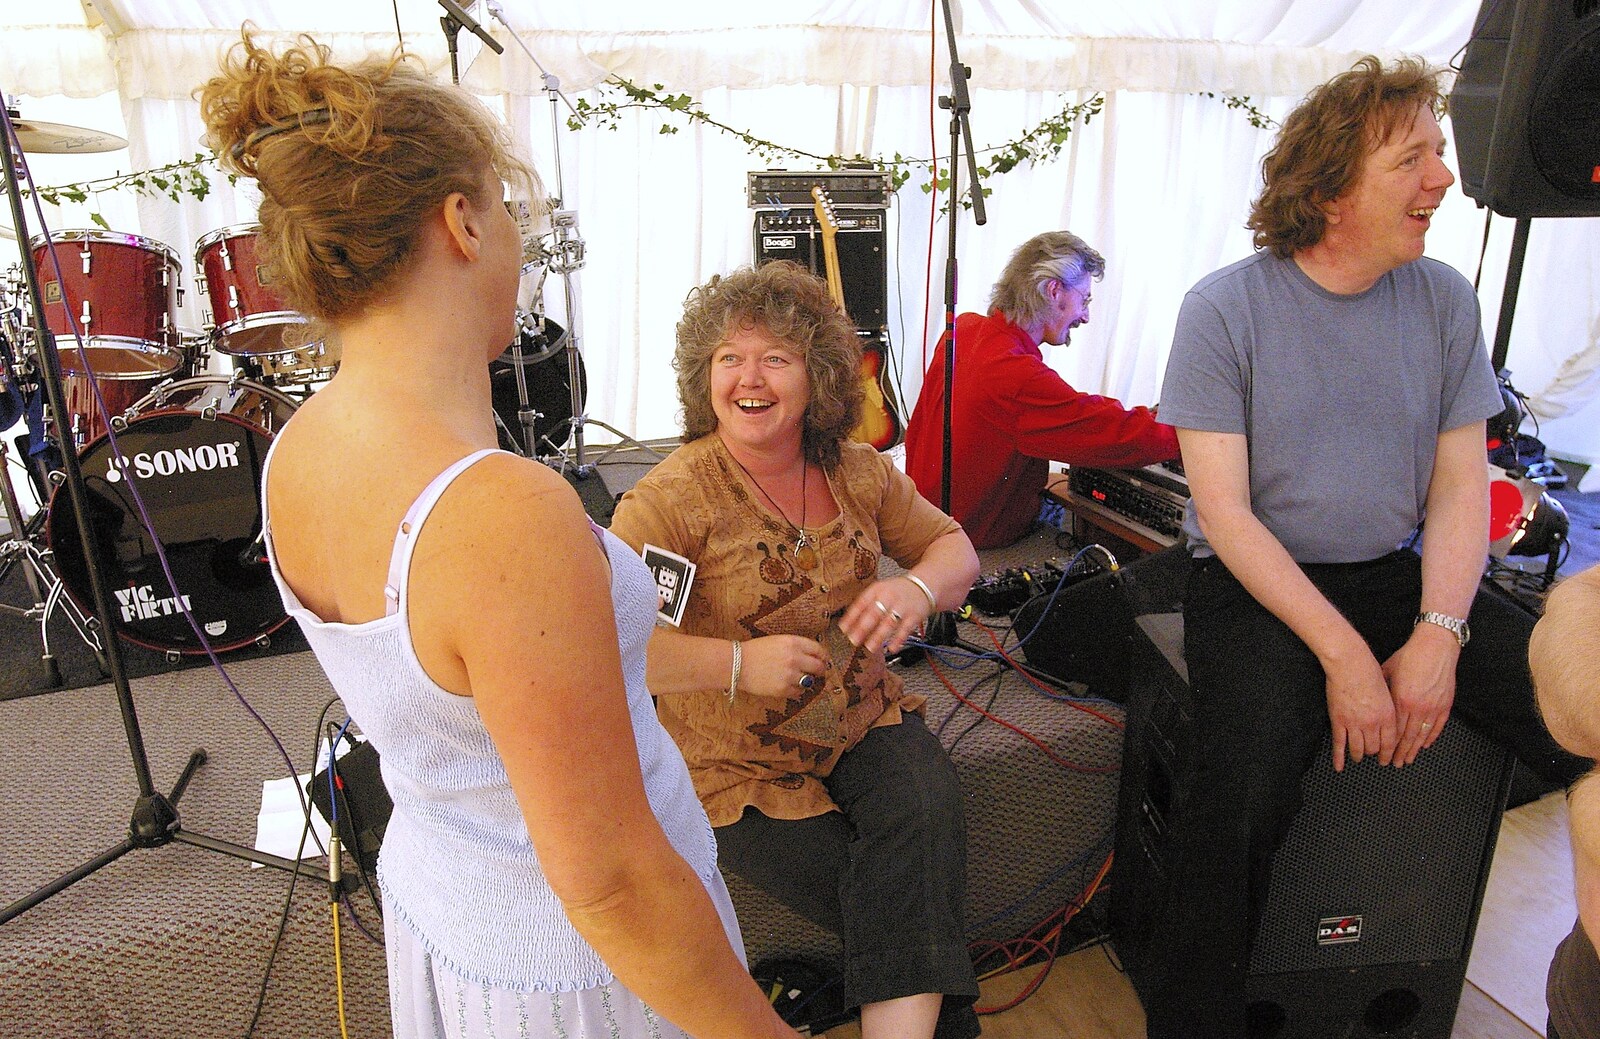 Jo shares a laugh with the organiser (left) from The BBs Play Athelington Hall, Horham, Suffolk - 29th June 2006